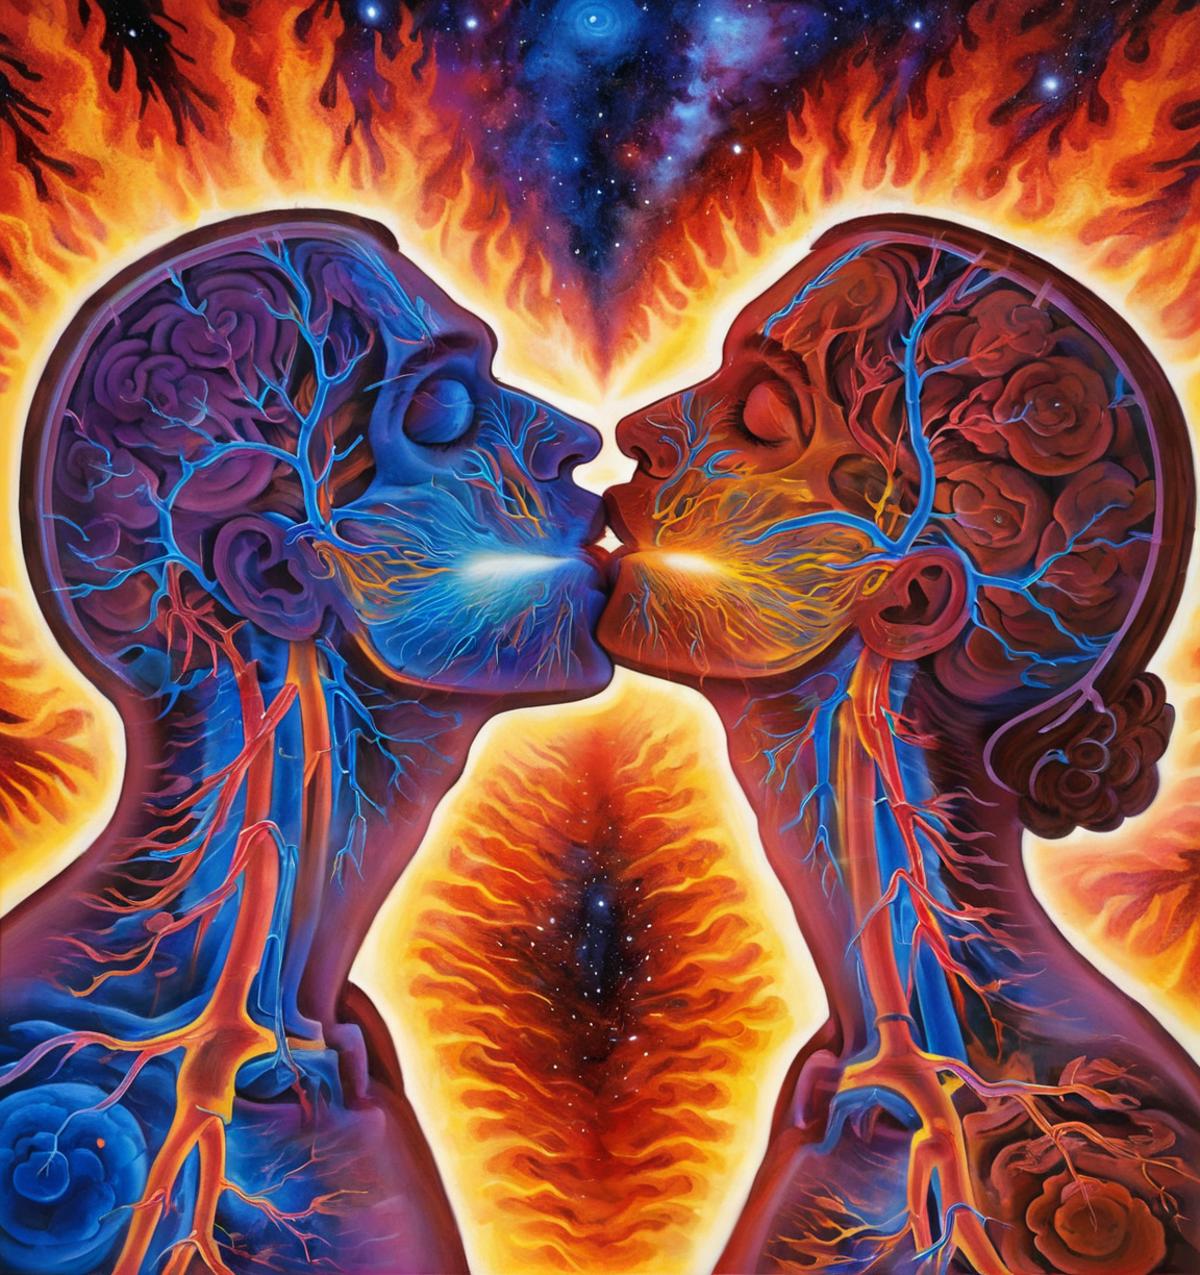 Artistic Illustration of Two Hearts Kissing with Blood Vessels and Fire Background